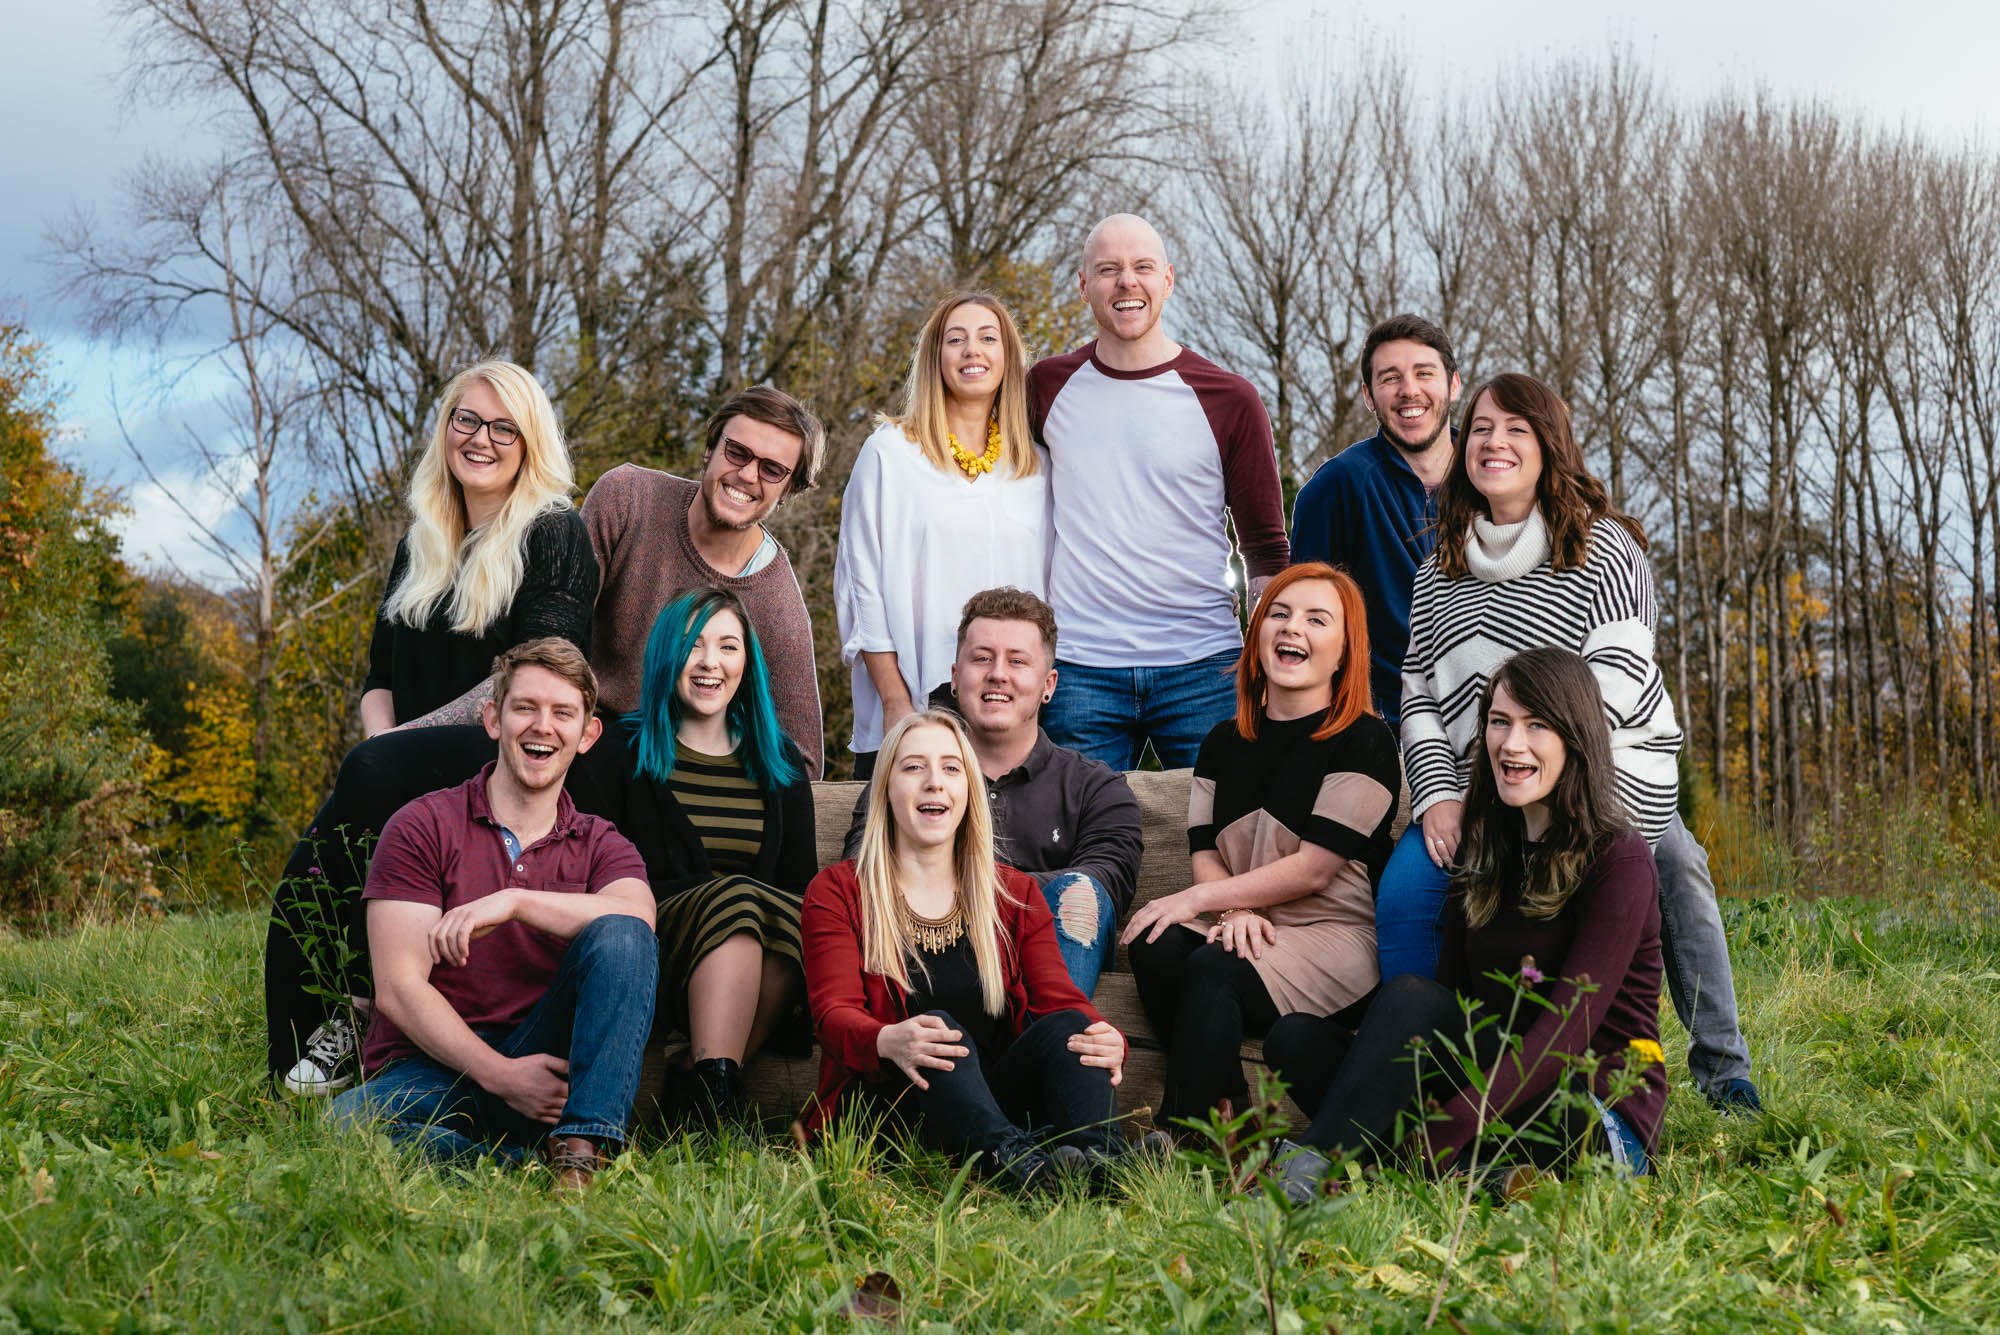 A team photo of the staff of dust and things laughing